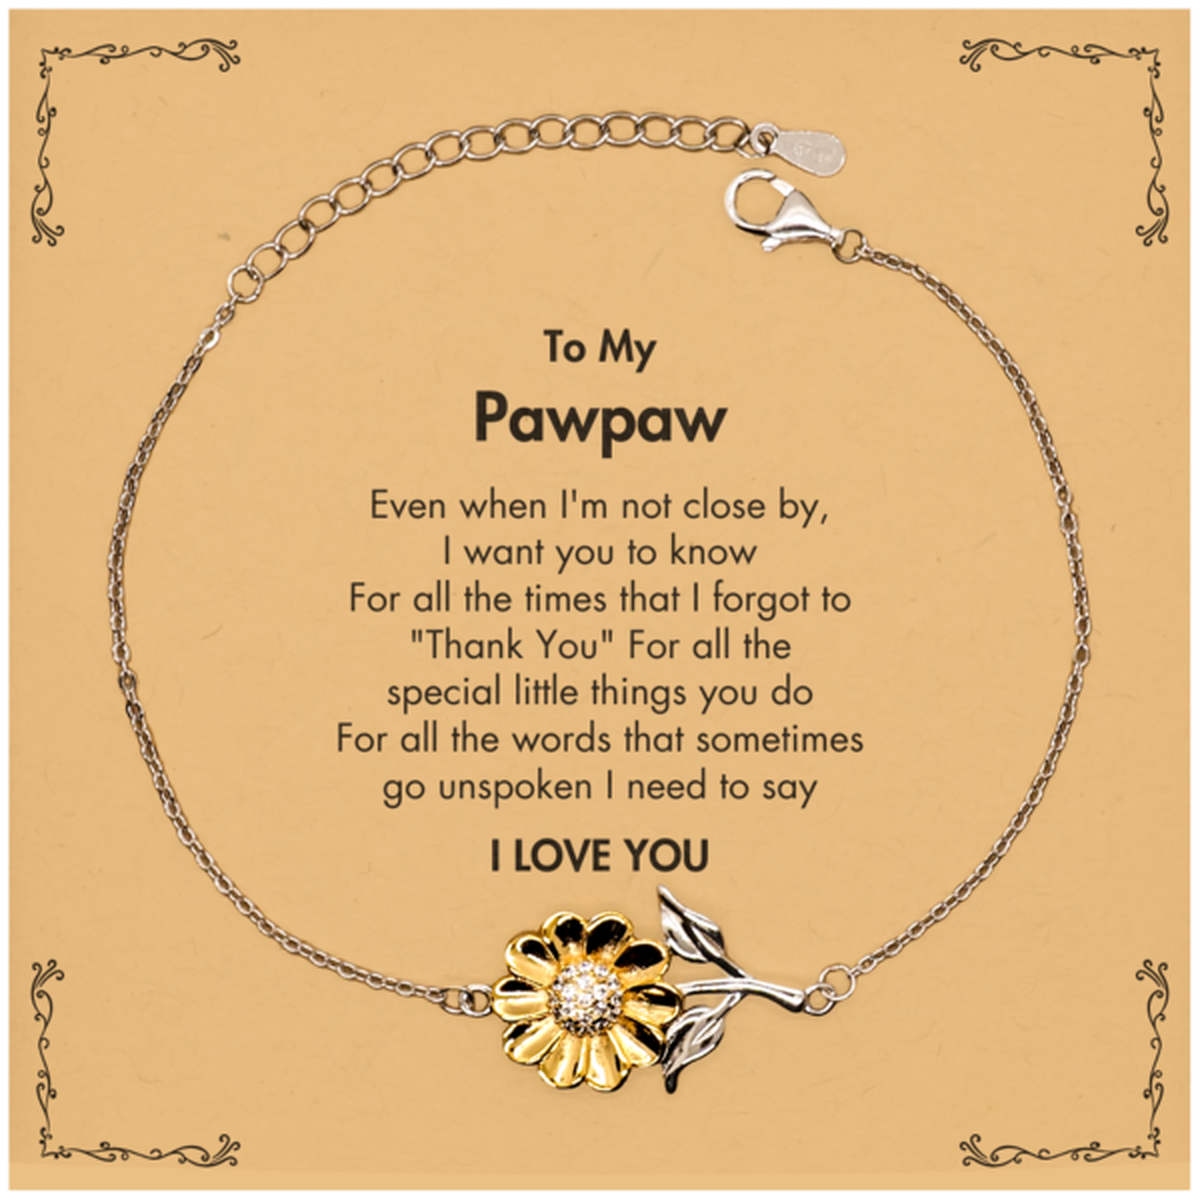 Thank You Gifts for Pawpaw, Keepsake Sunflower Bracelet Gifts for Pawpaw Birthday Mother's day Father's Day Pawpaw For all the words That sometimes go unspoken I need to say I LOVE YOU